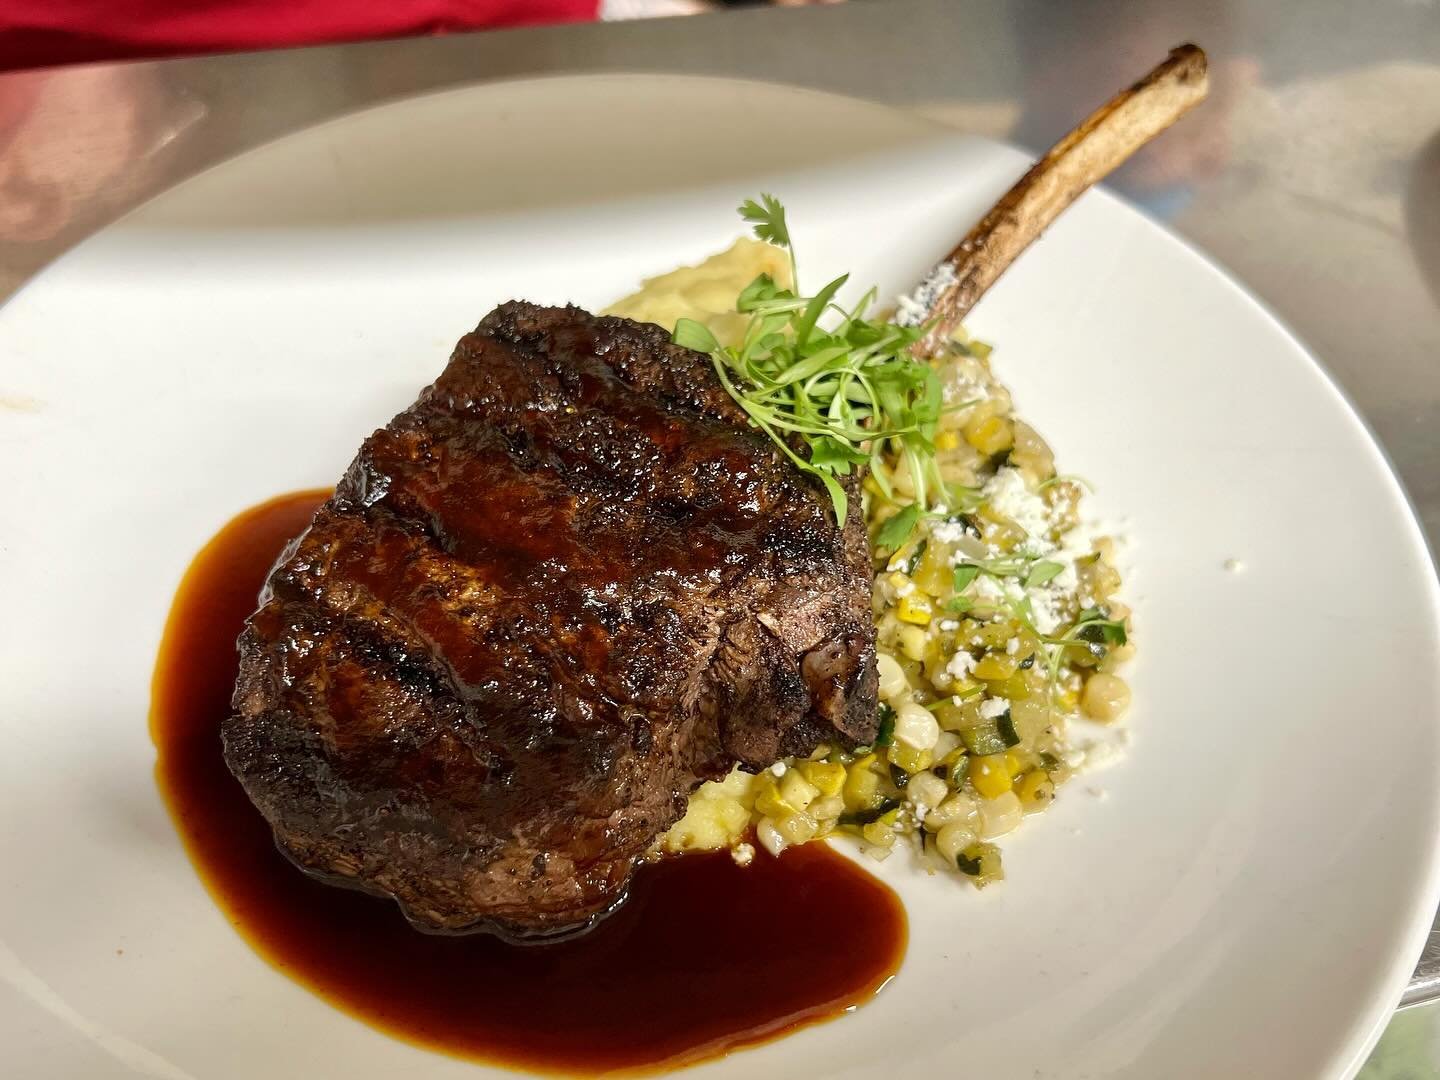 FAN FAVORITE!  Grilled NM Elk Chop accompanies our Green Chile Whipped Potatoes and Calabacitas. #lodgestyle #wildgame #elk #lunch #dinner #glutenfree